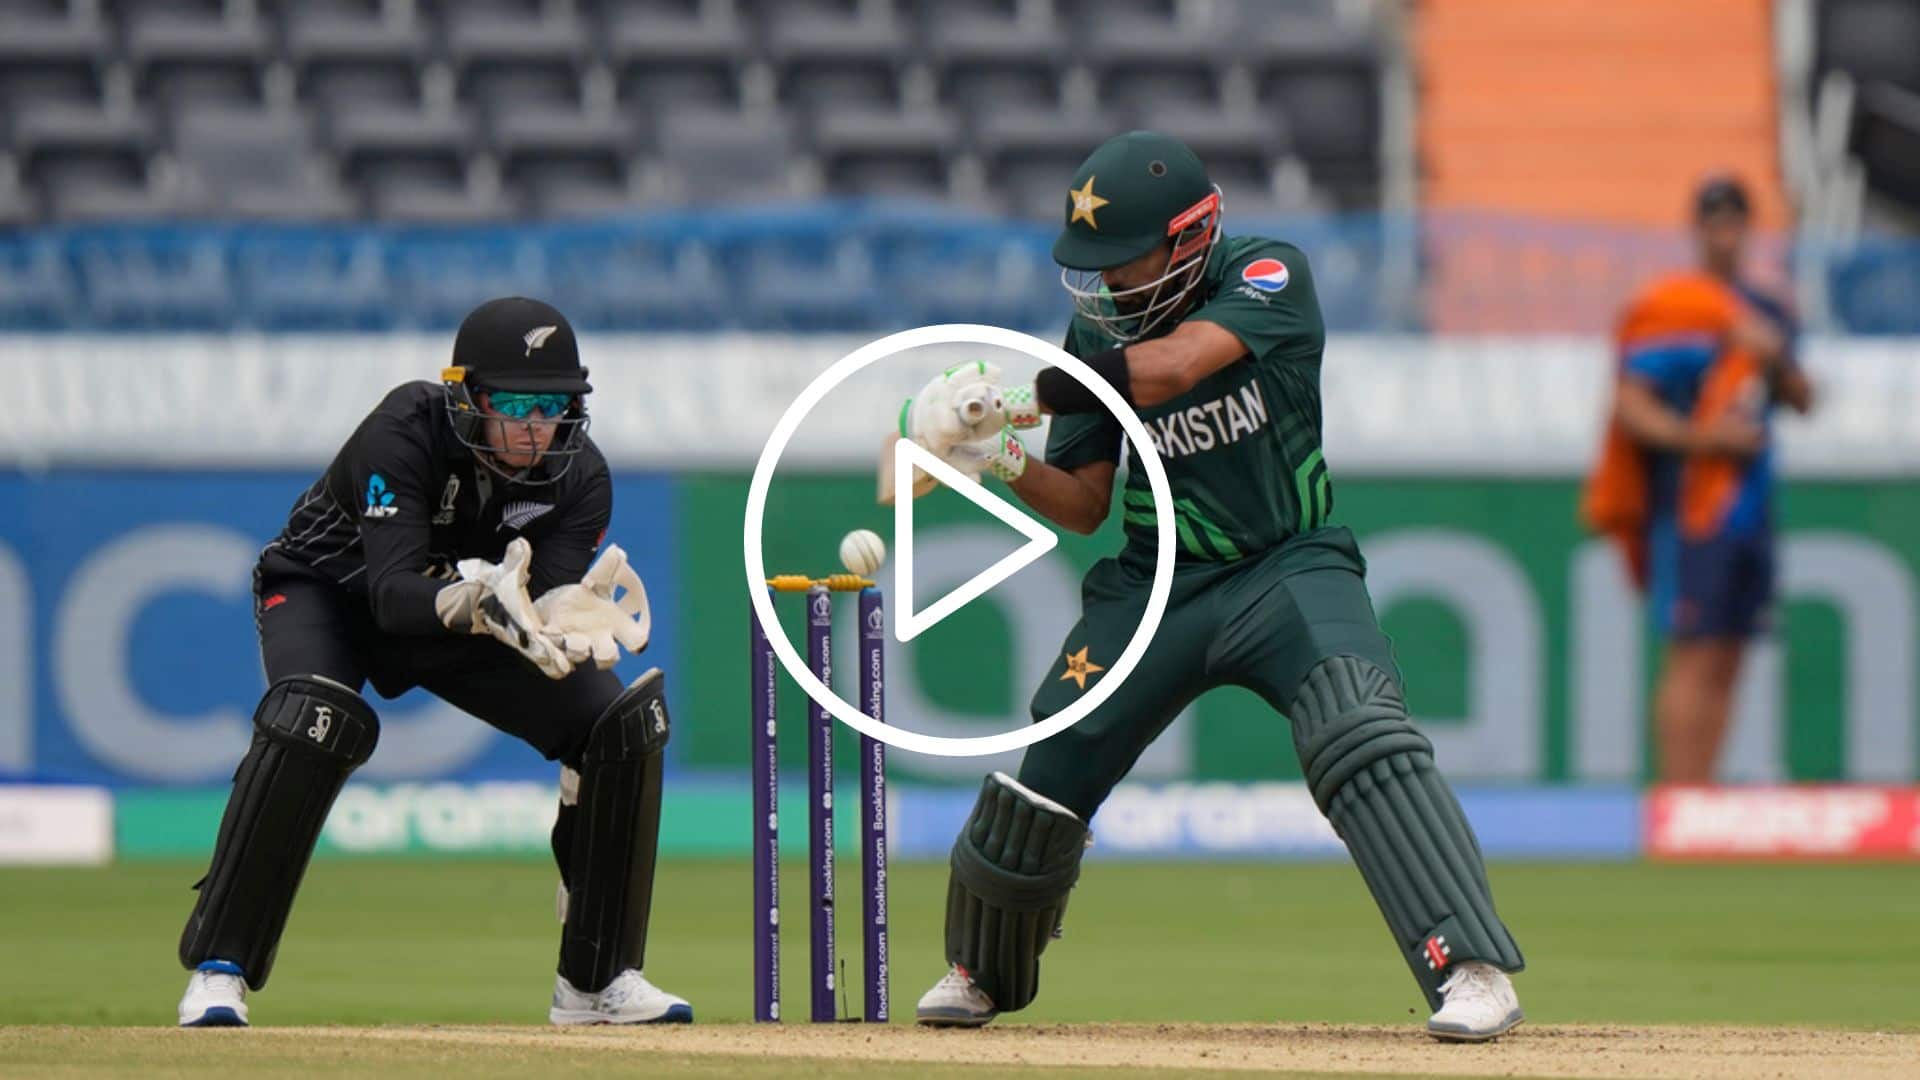 [Watch] Babar Azam Races To Half-Century With An Exquisite Cut Shot